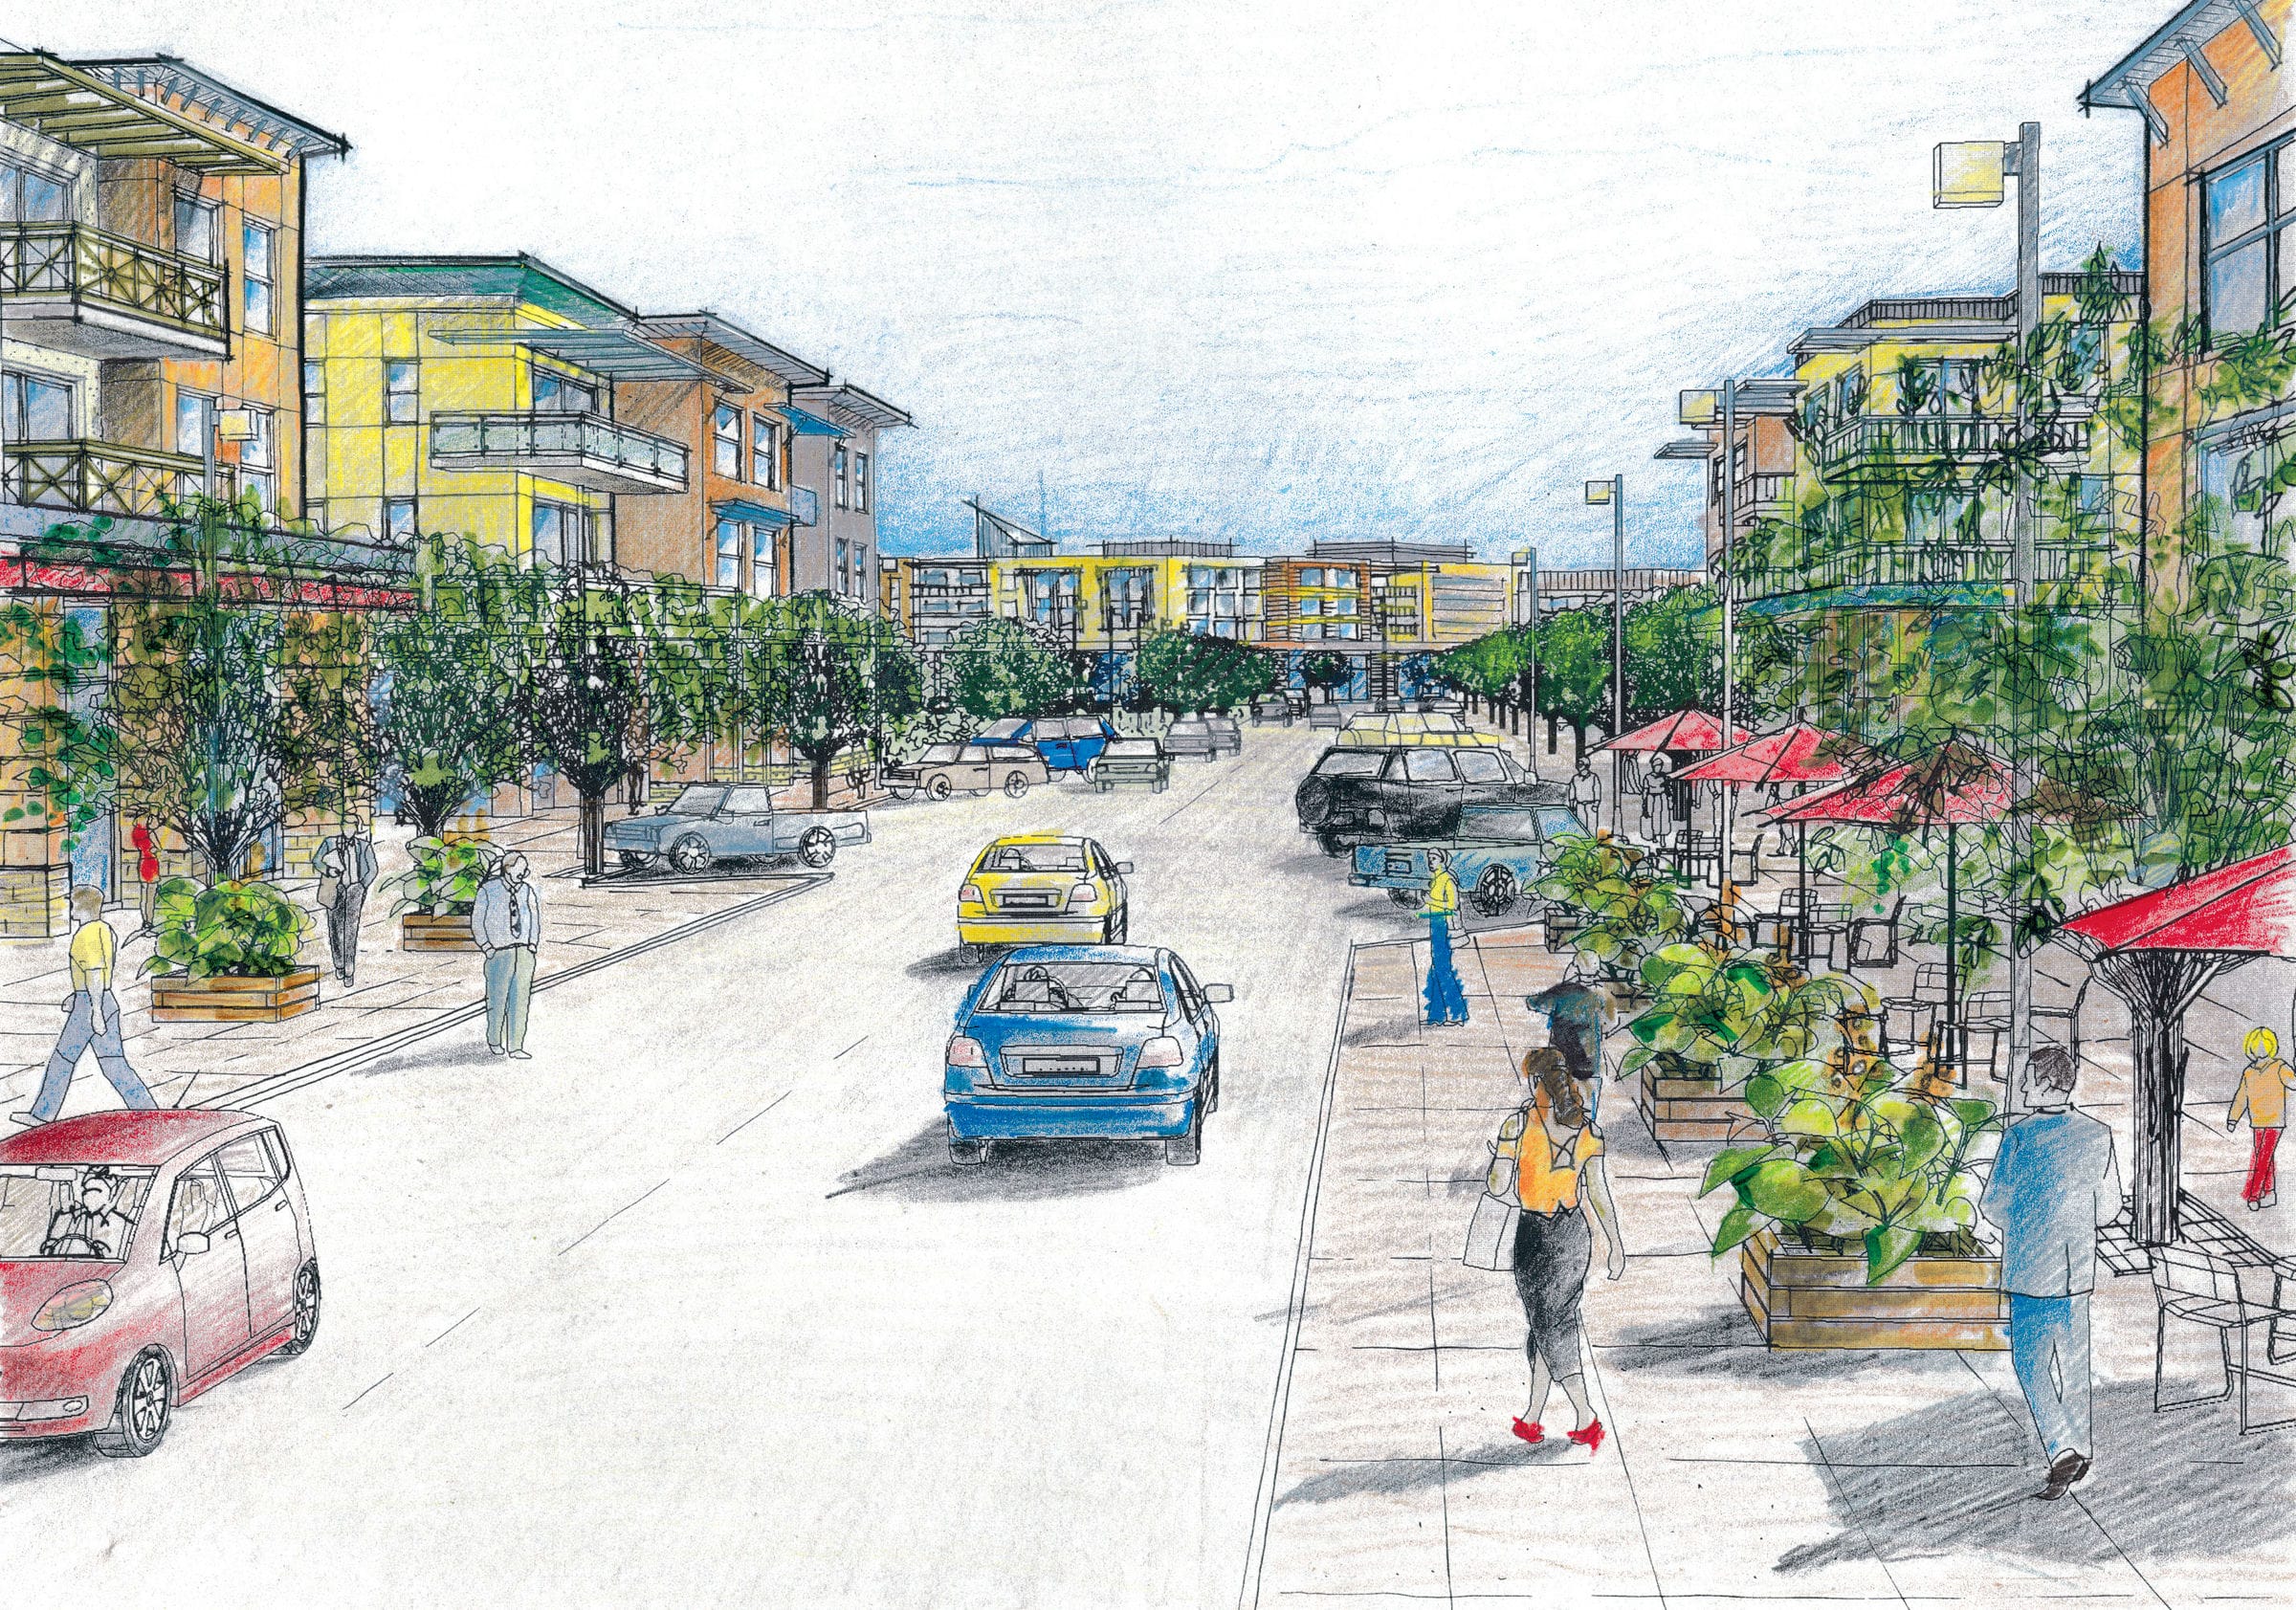 Westminster Mall's redevelopment plans include 1,100 homes